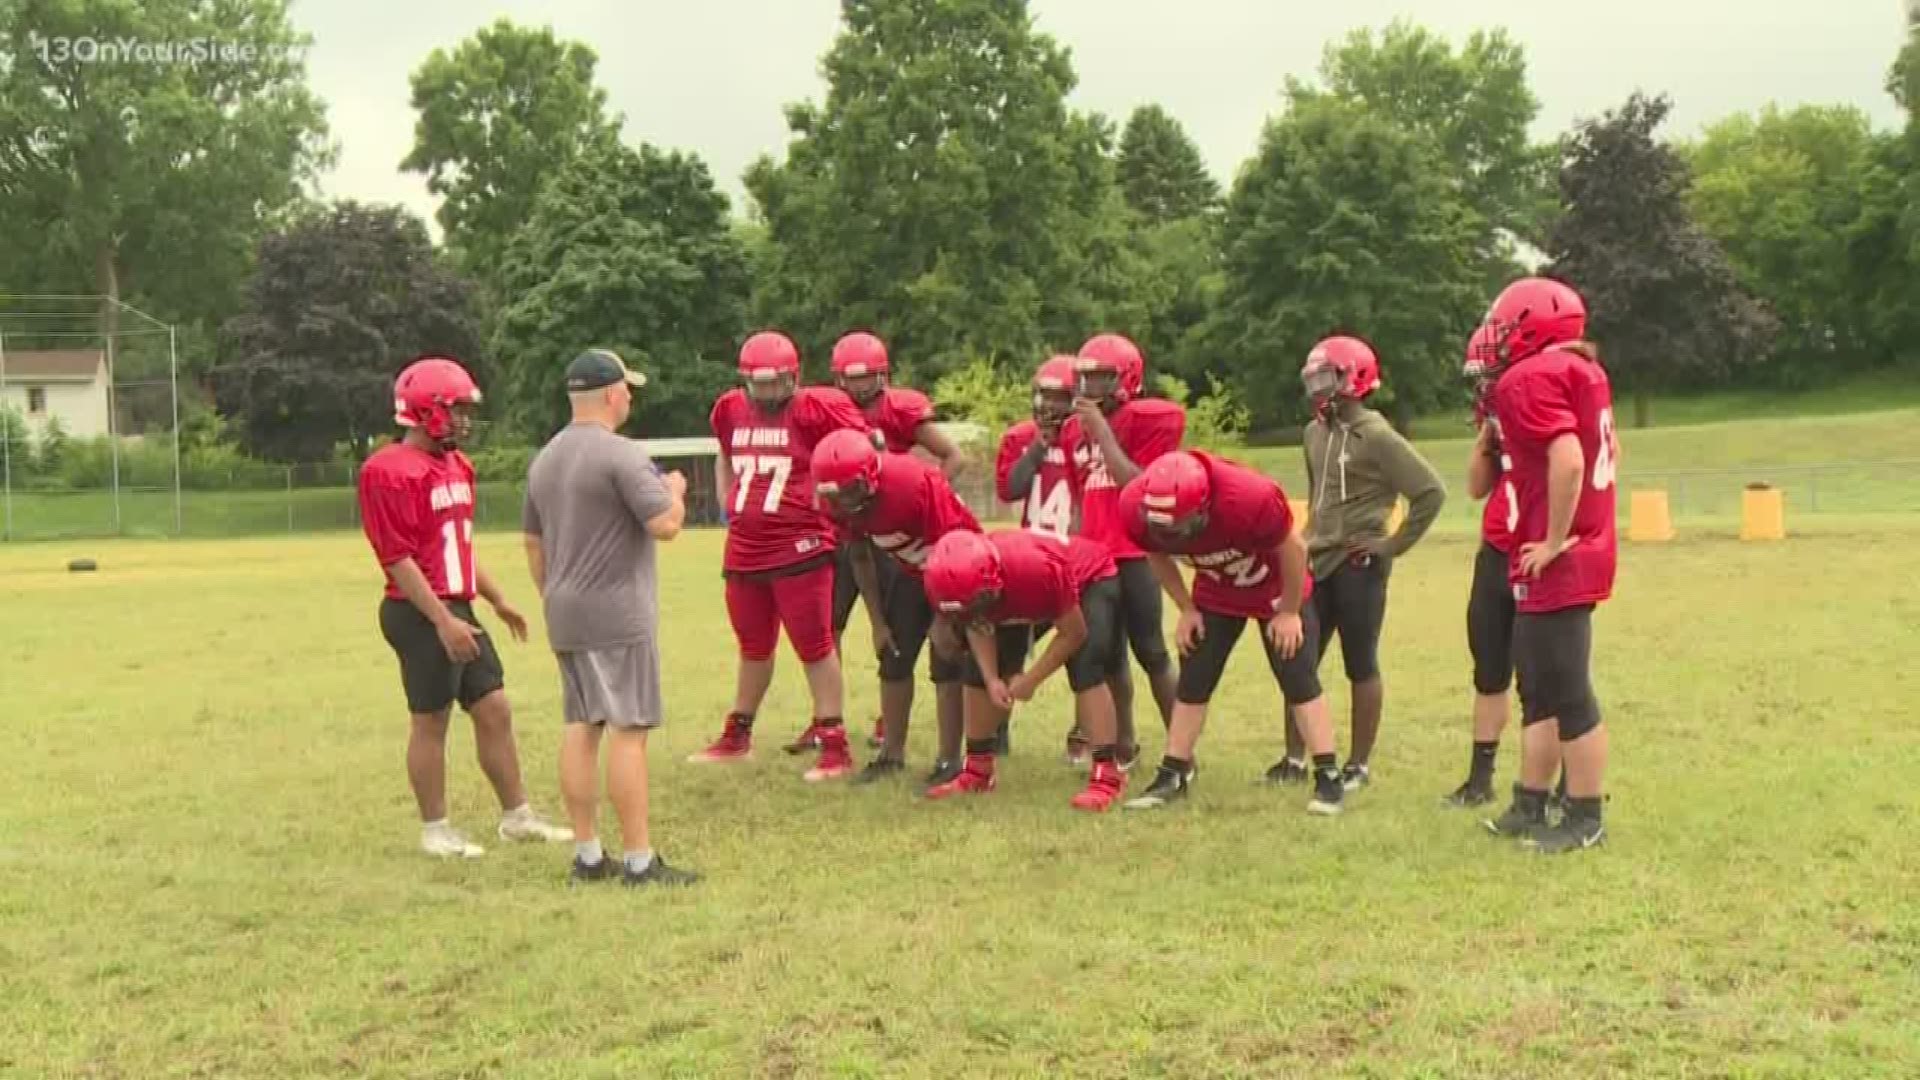 Head Coach Rick Angstman has made some changes to the offense and the staff, and the Redhawks have shown signs of improvement in fall camp.